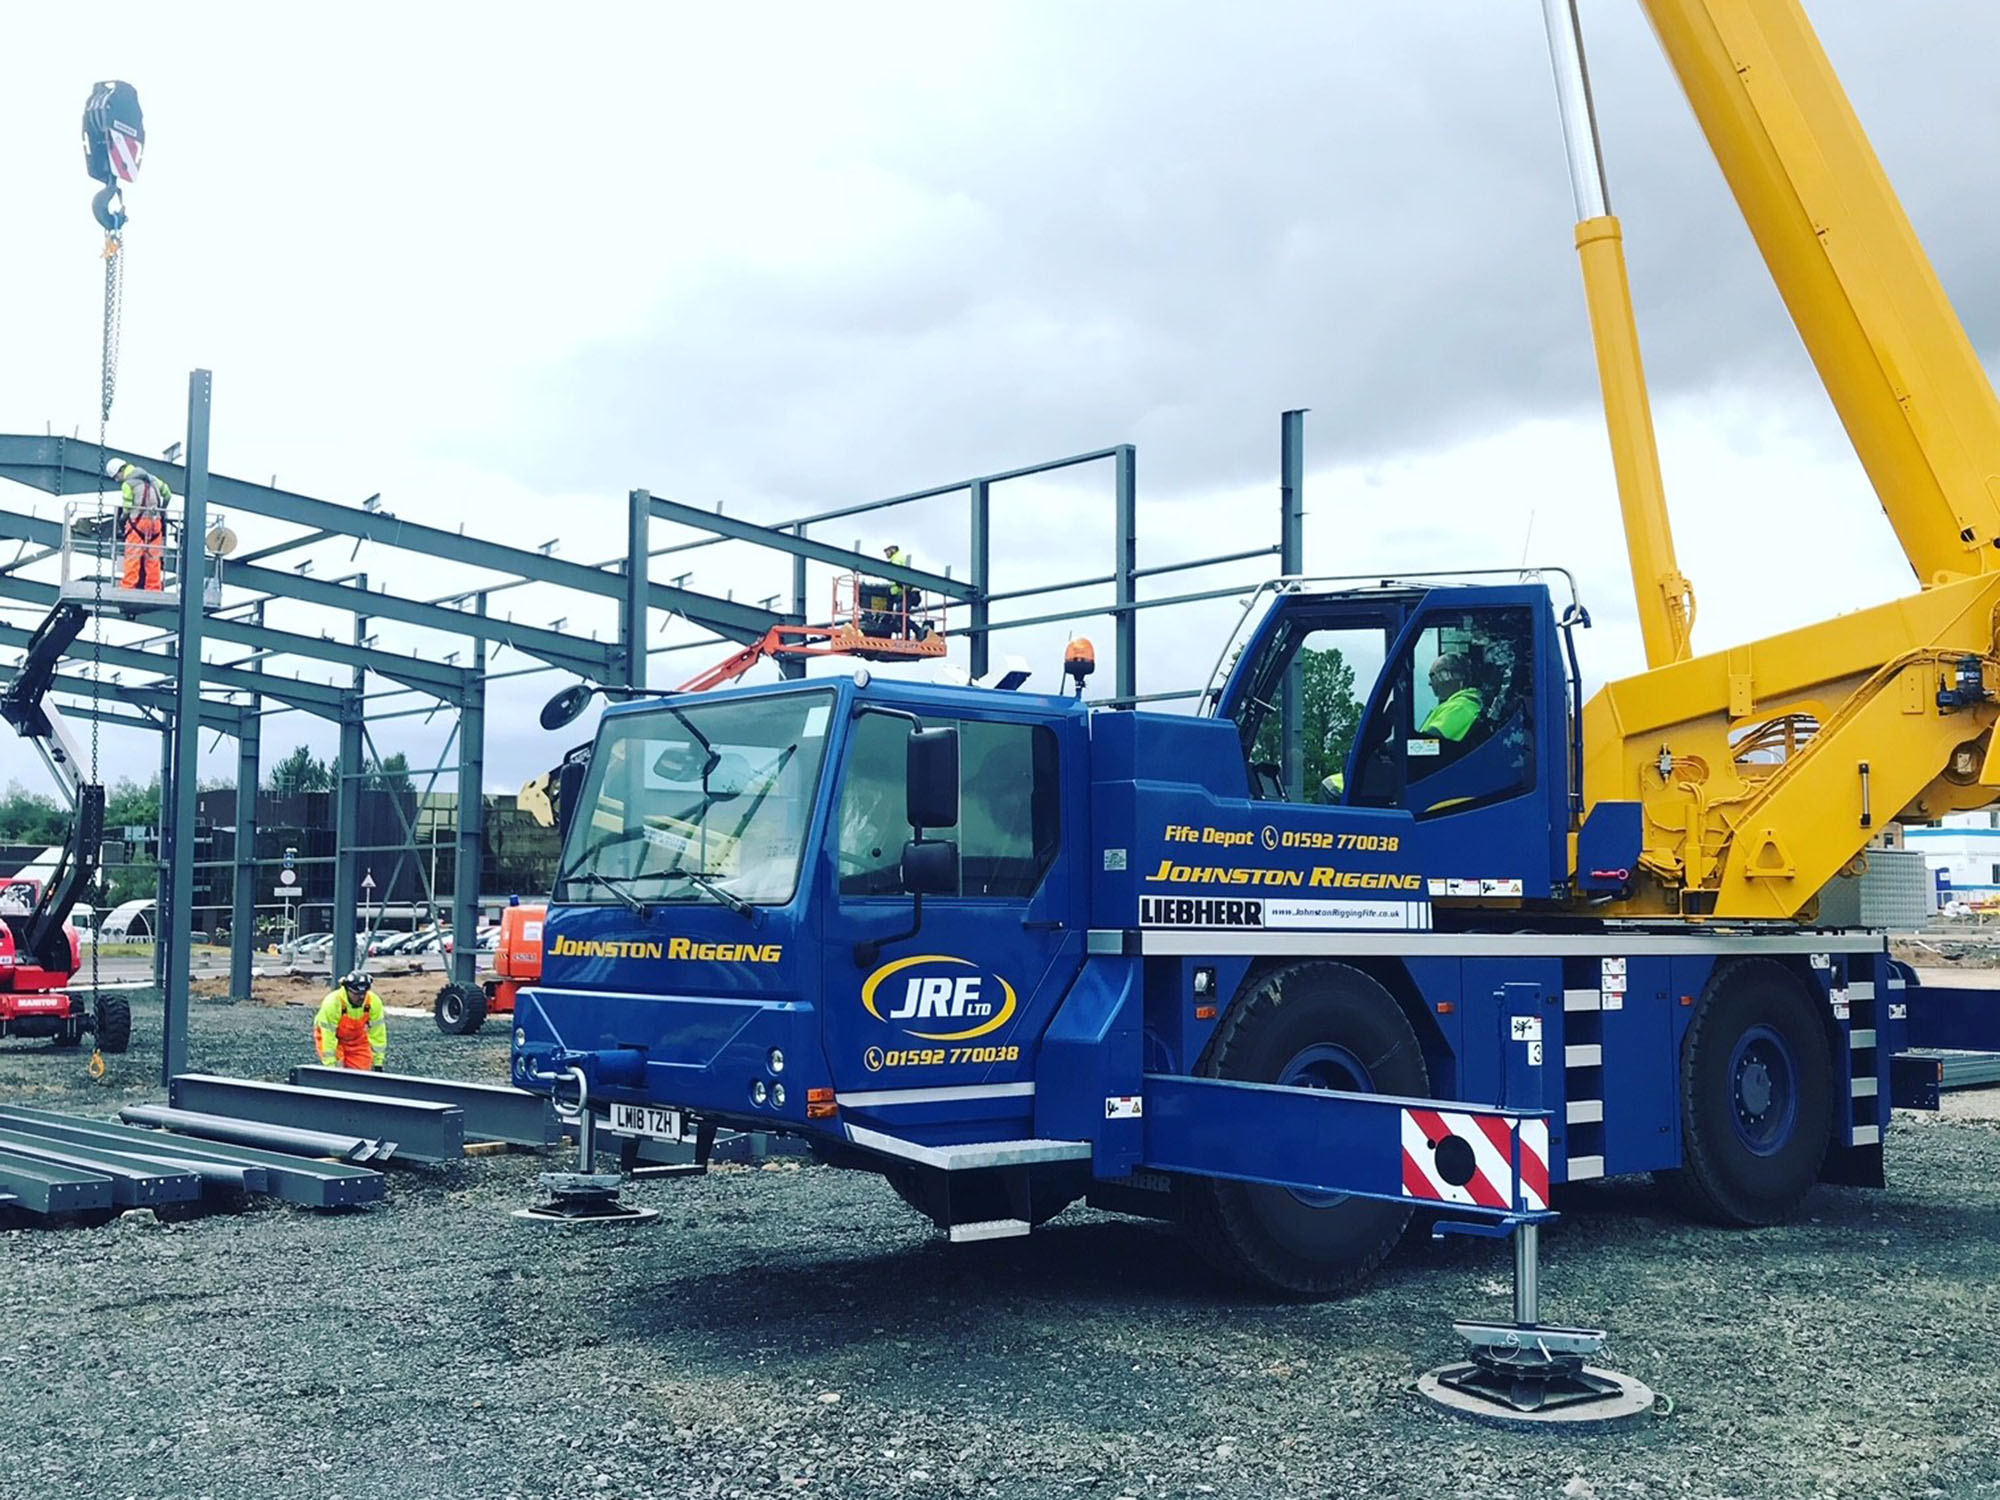 Mobile crane hire in glenrothes